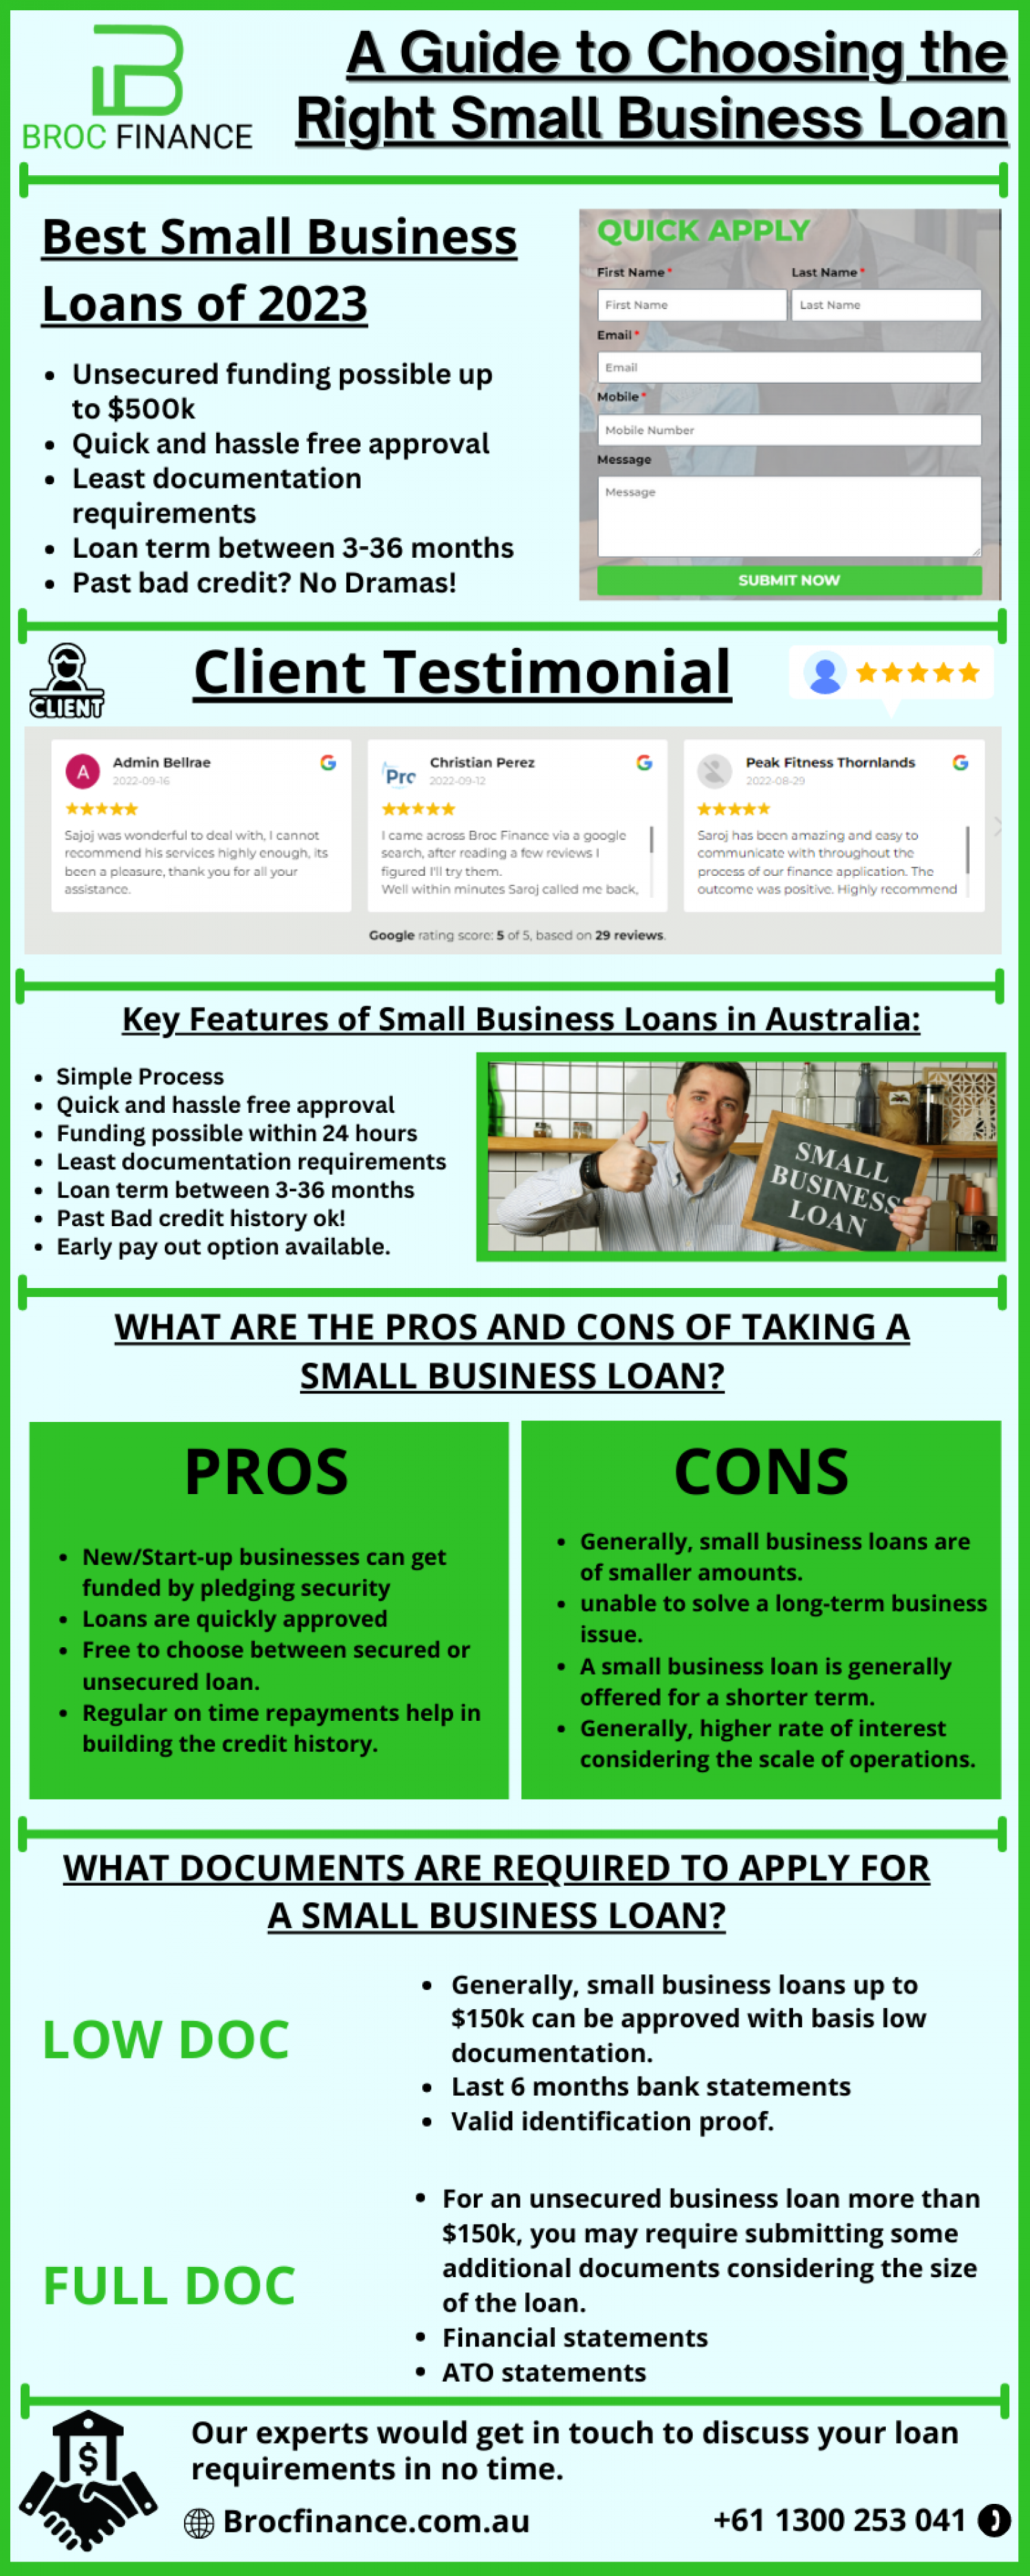 Small Business Loan  - Broc Finance Infographic